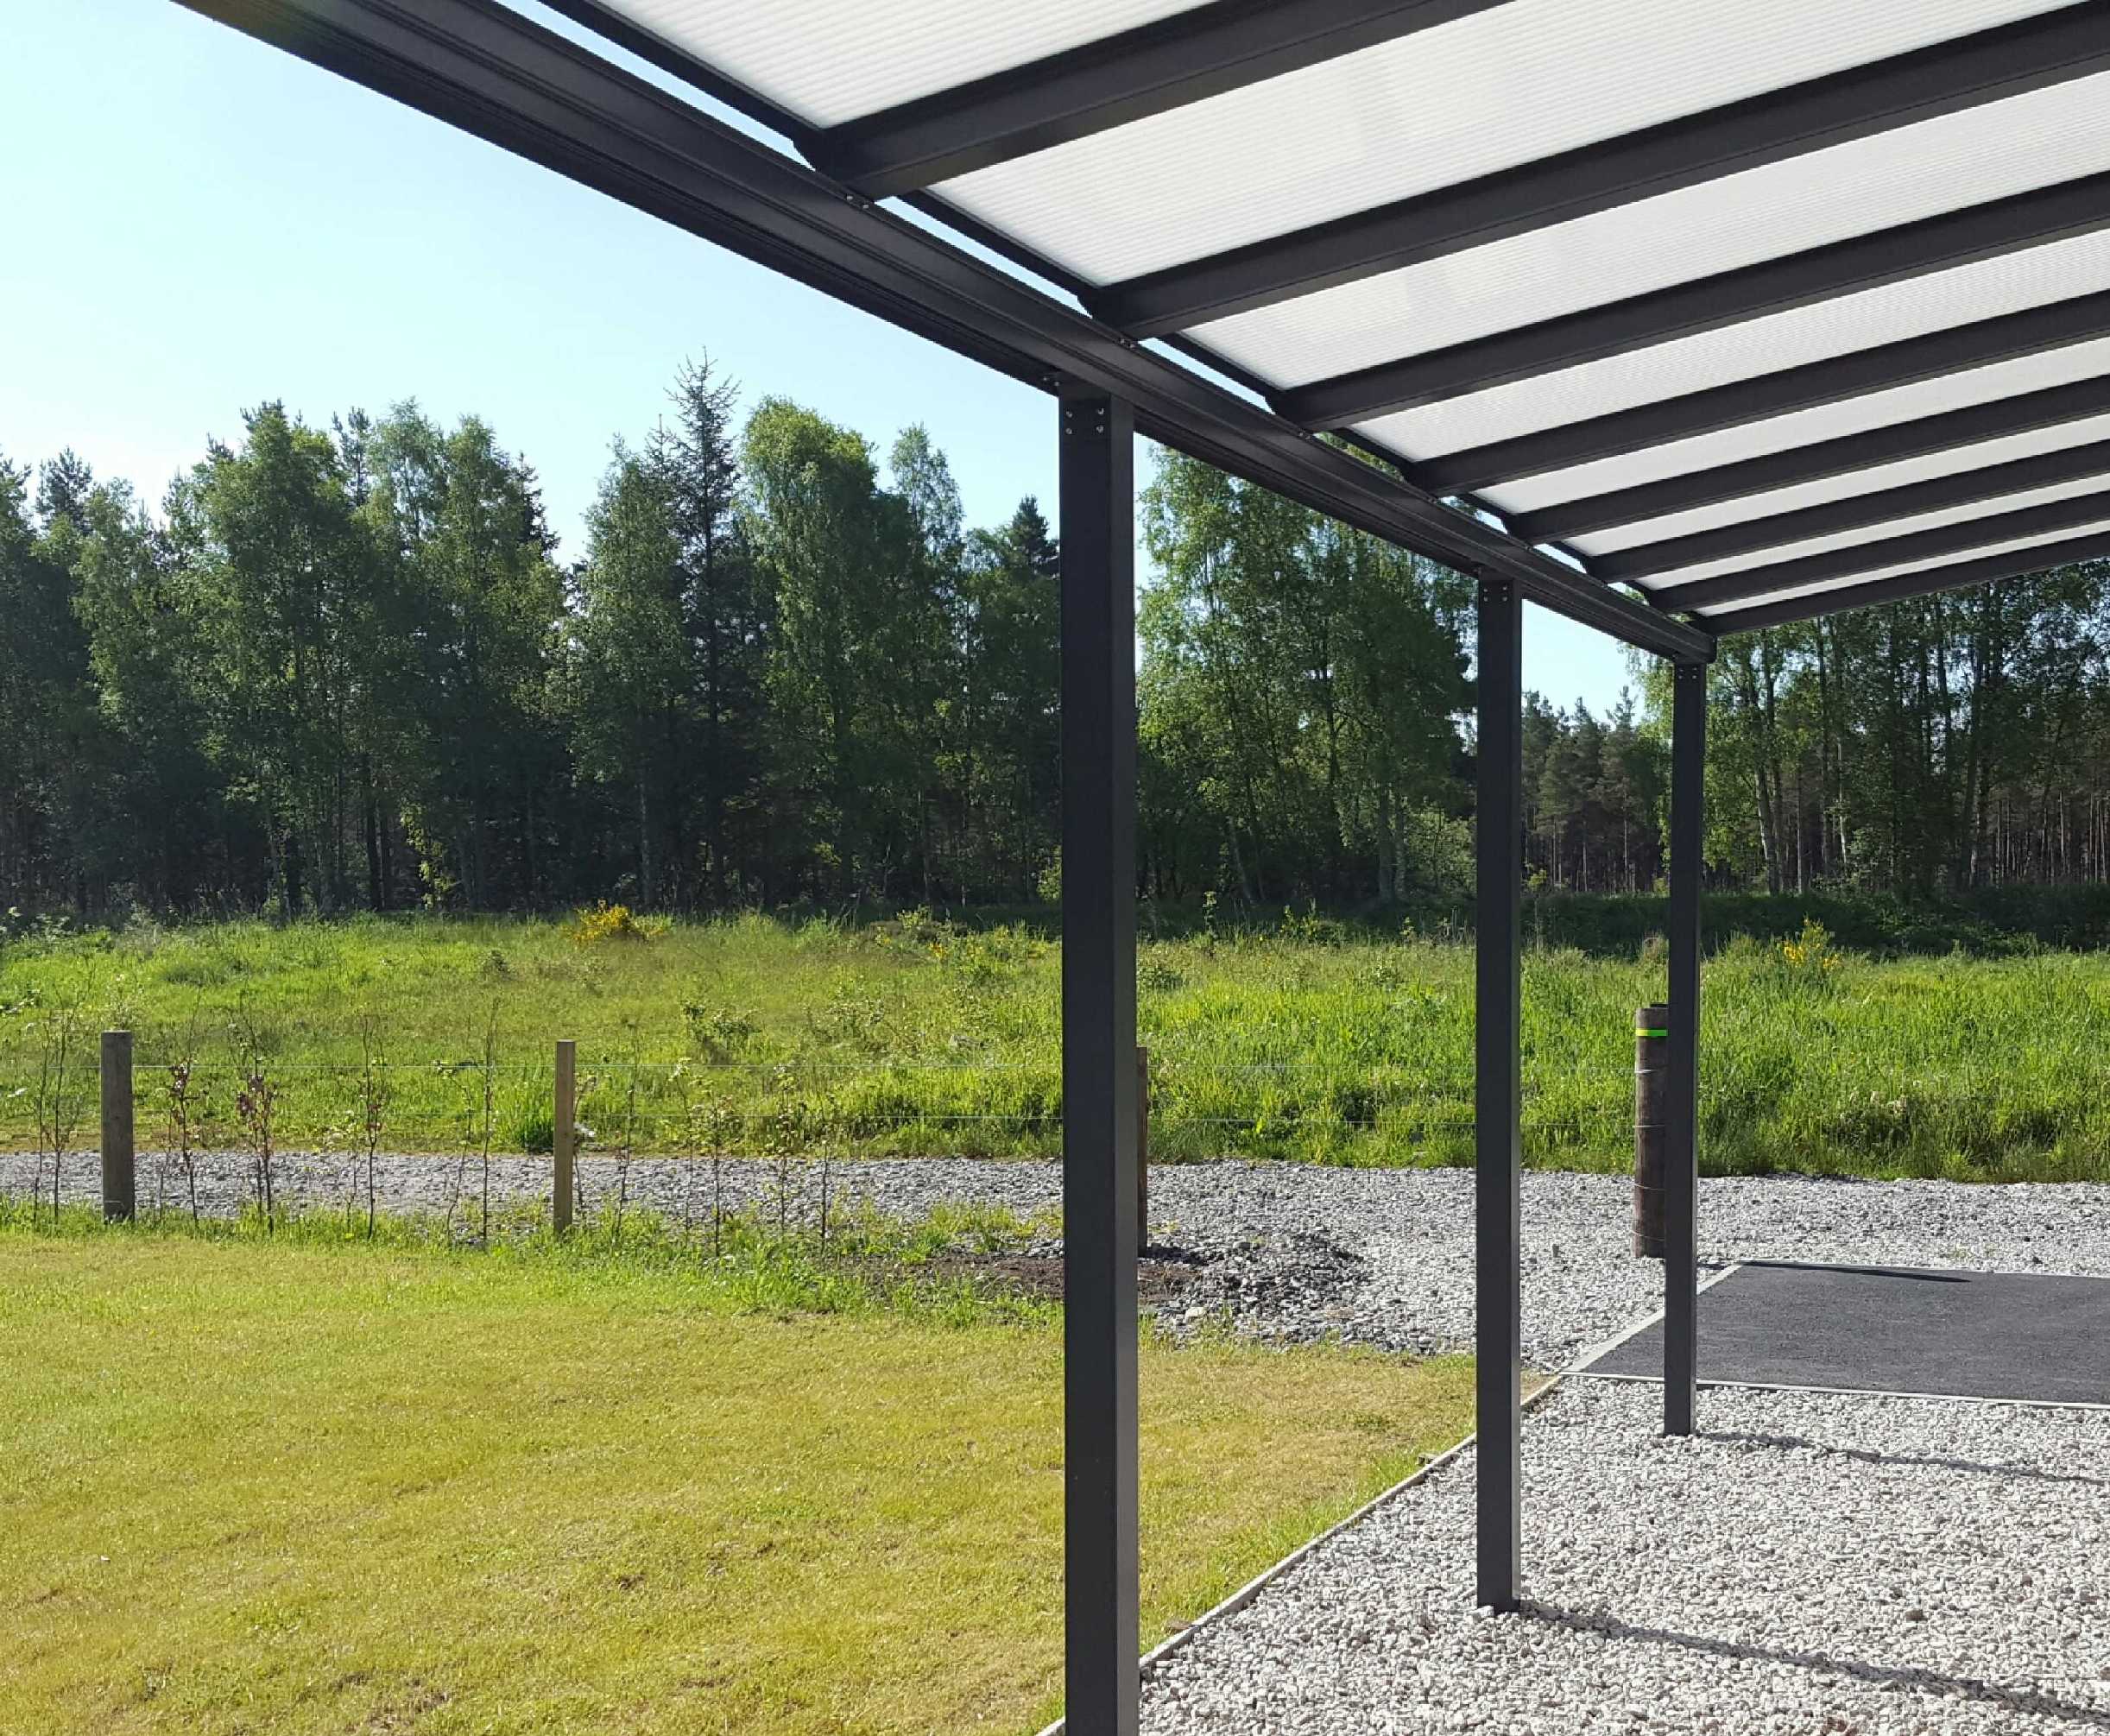 Omega Smart Lean-To Canopy, Anthracite Grey, 6mm Glass Clear Plate Polycarbonate Glazing - 7.7m (W) x 3.5m (P), (4) Supporting Posts